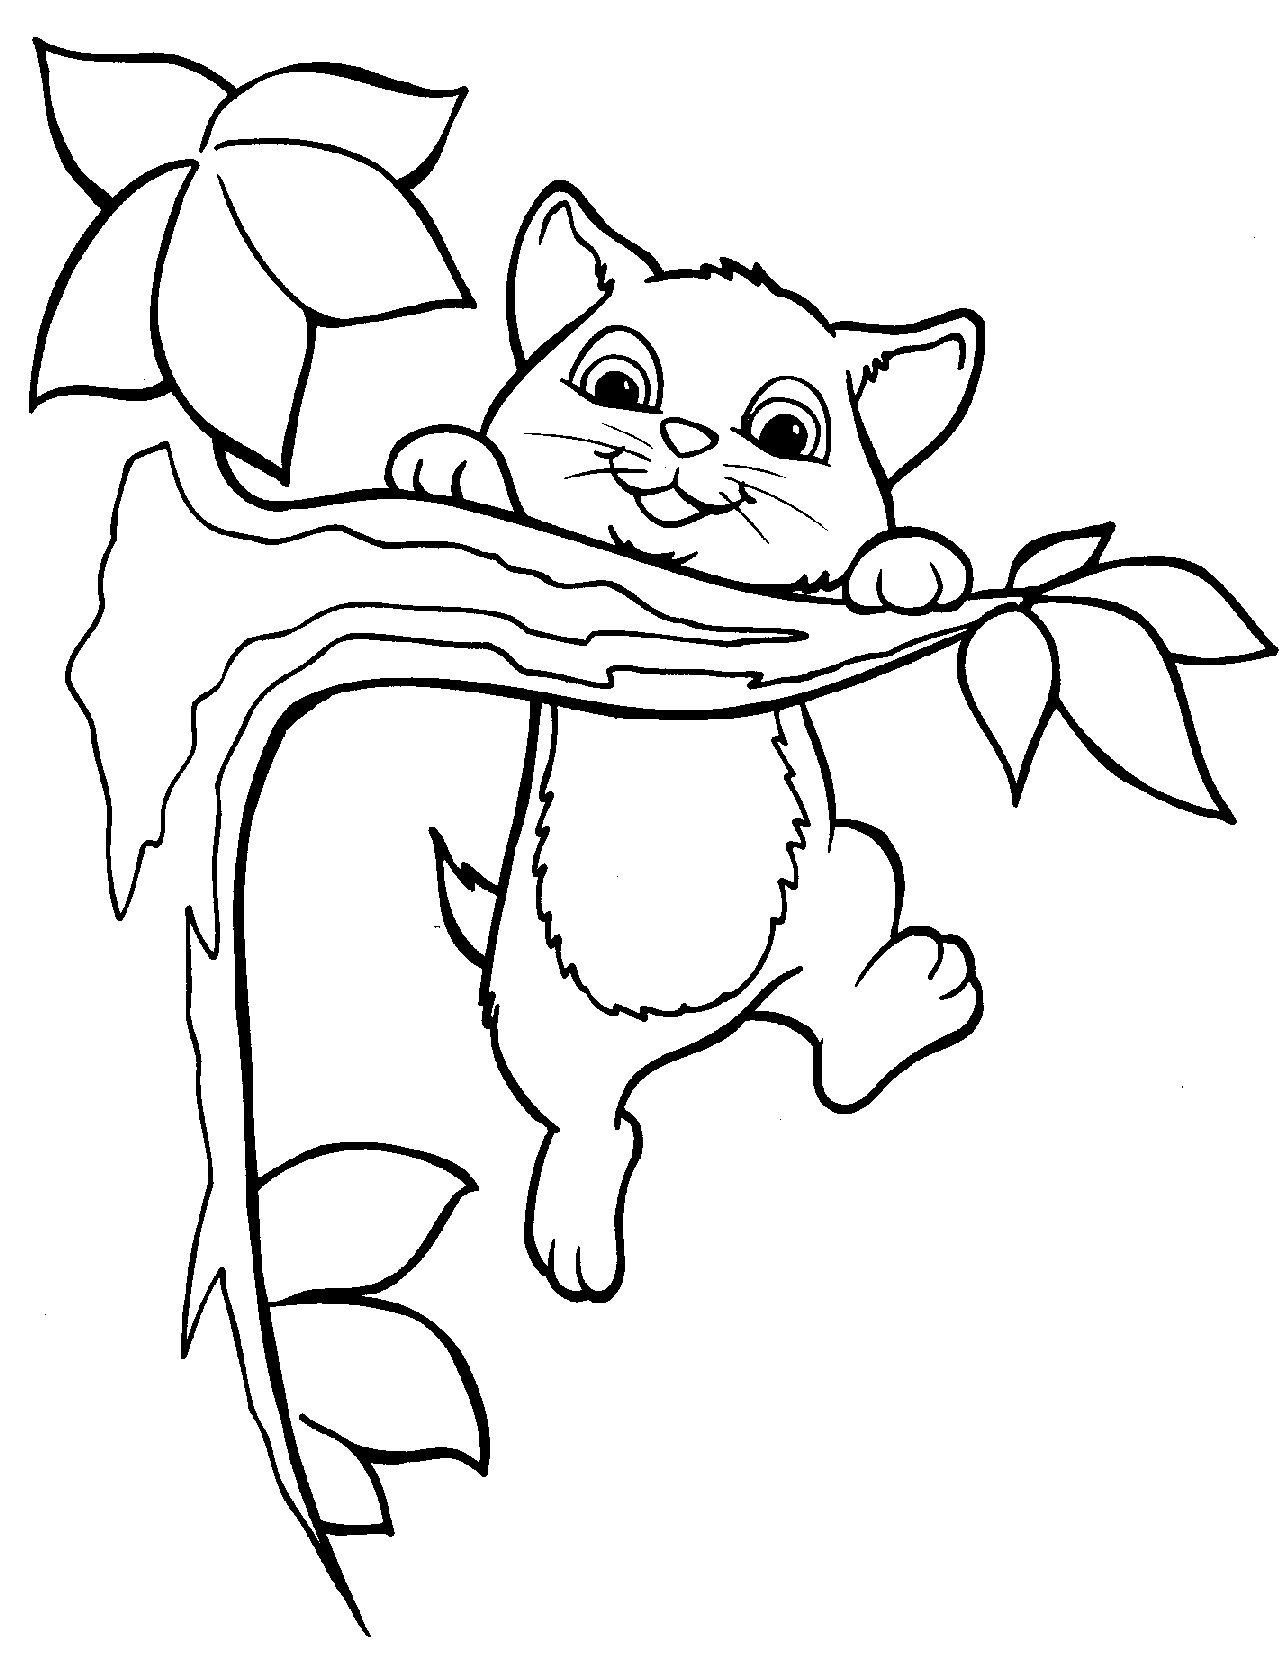 kitten color pages free printable kitten coloring pages for kids best pages kitten color 